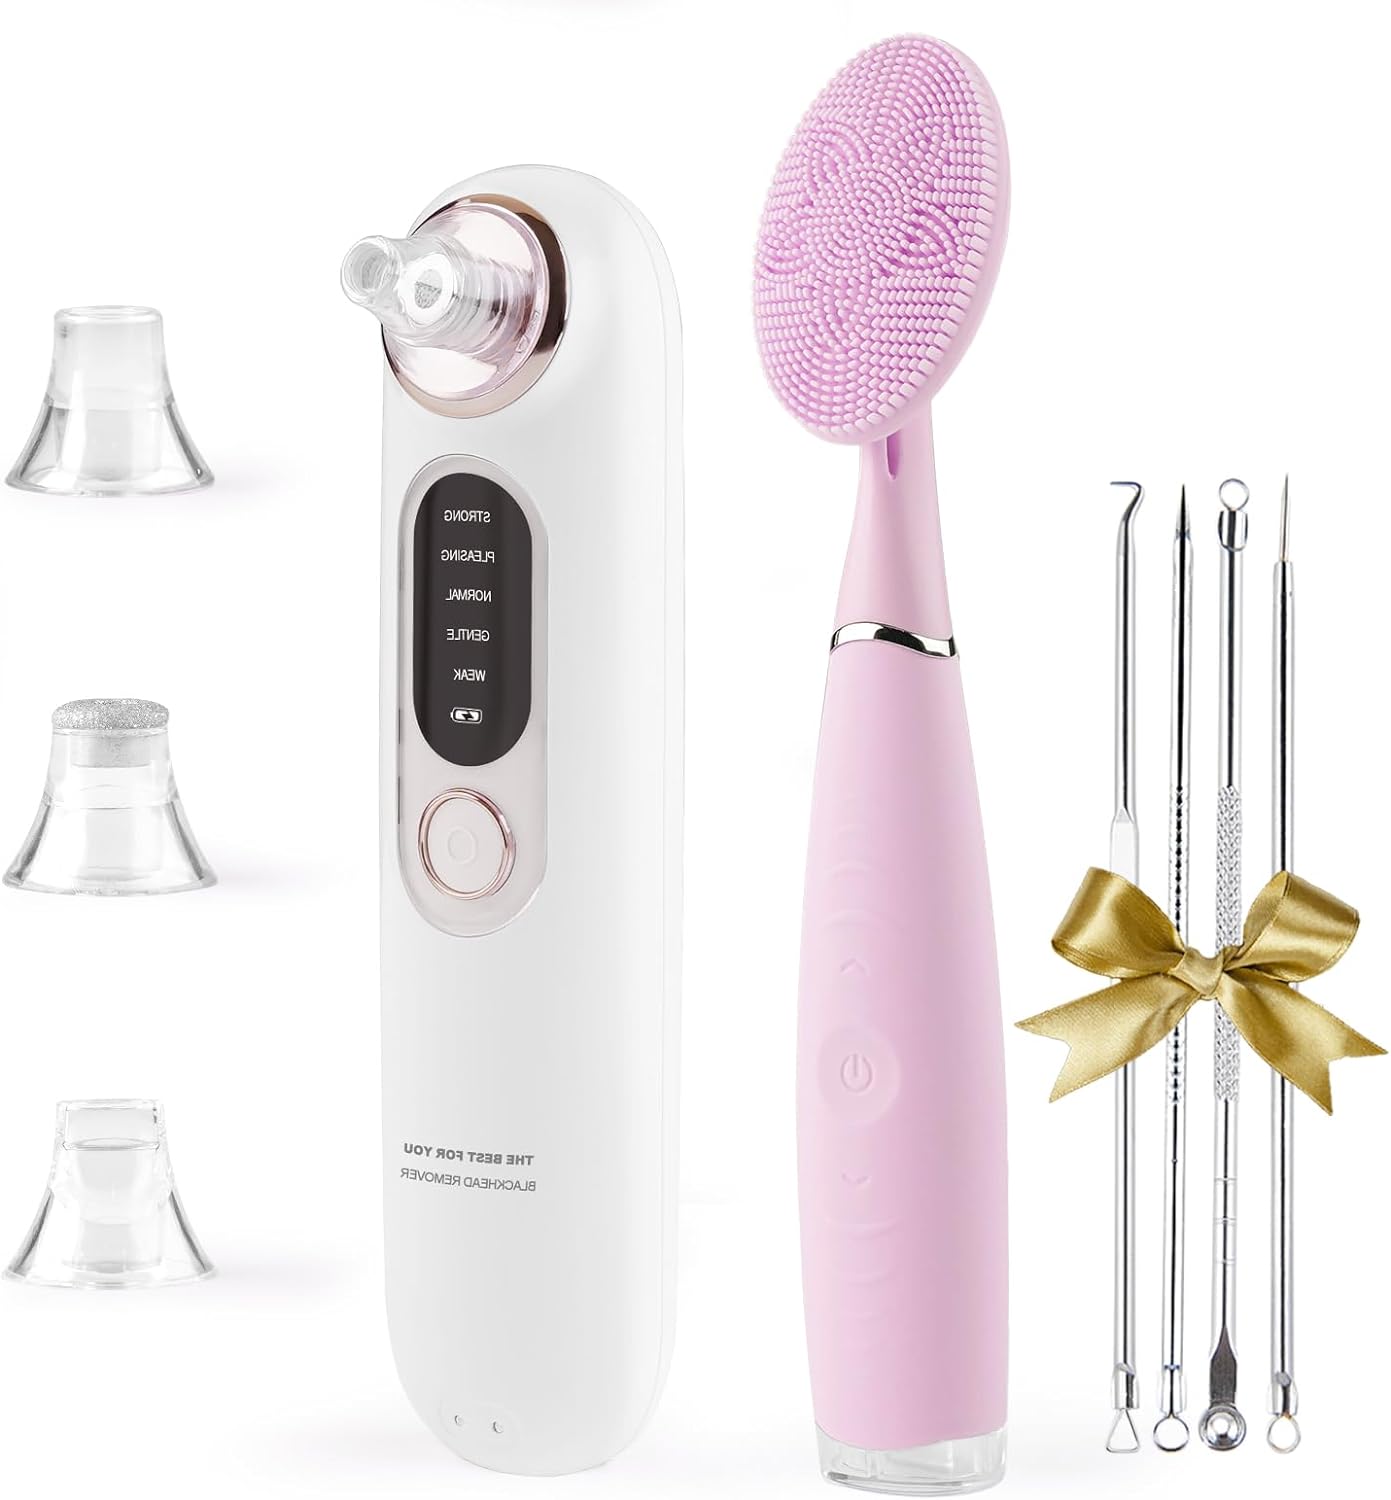 Blackhead Remover Vacuum Set- Hotodeal Face Brush Electric Facial Pore Cleaner with 4 Replaceable Heads